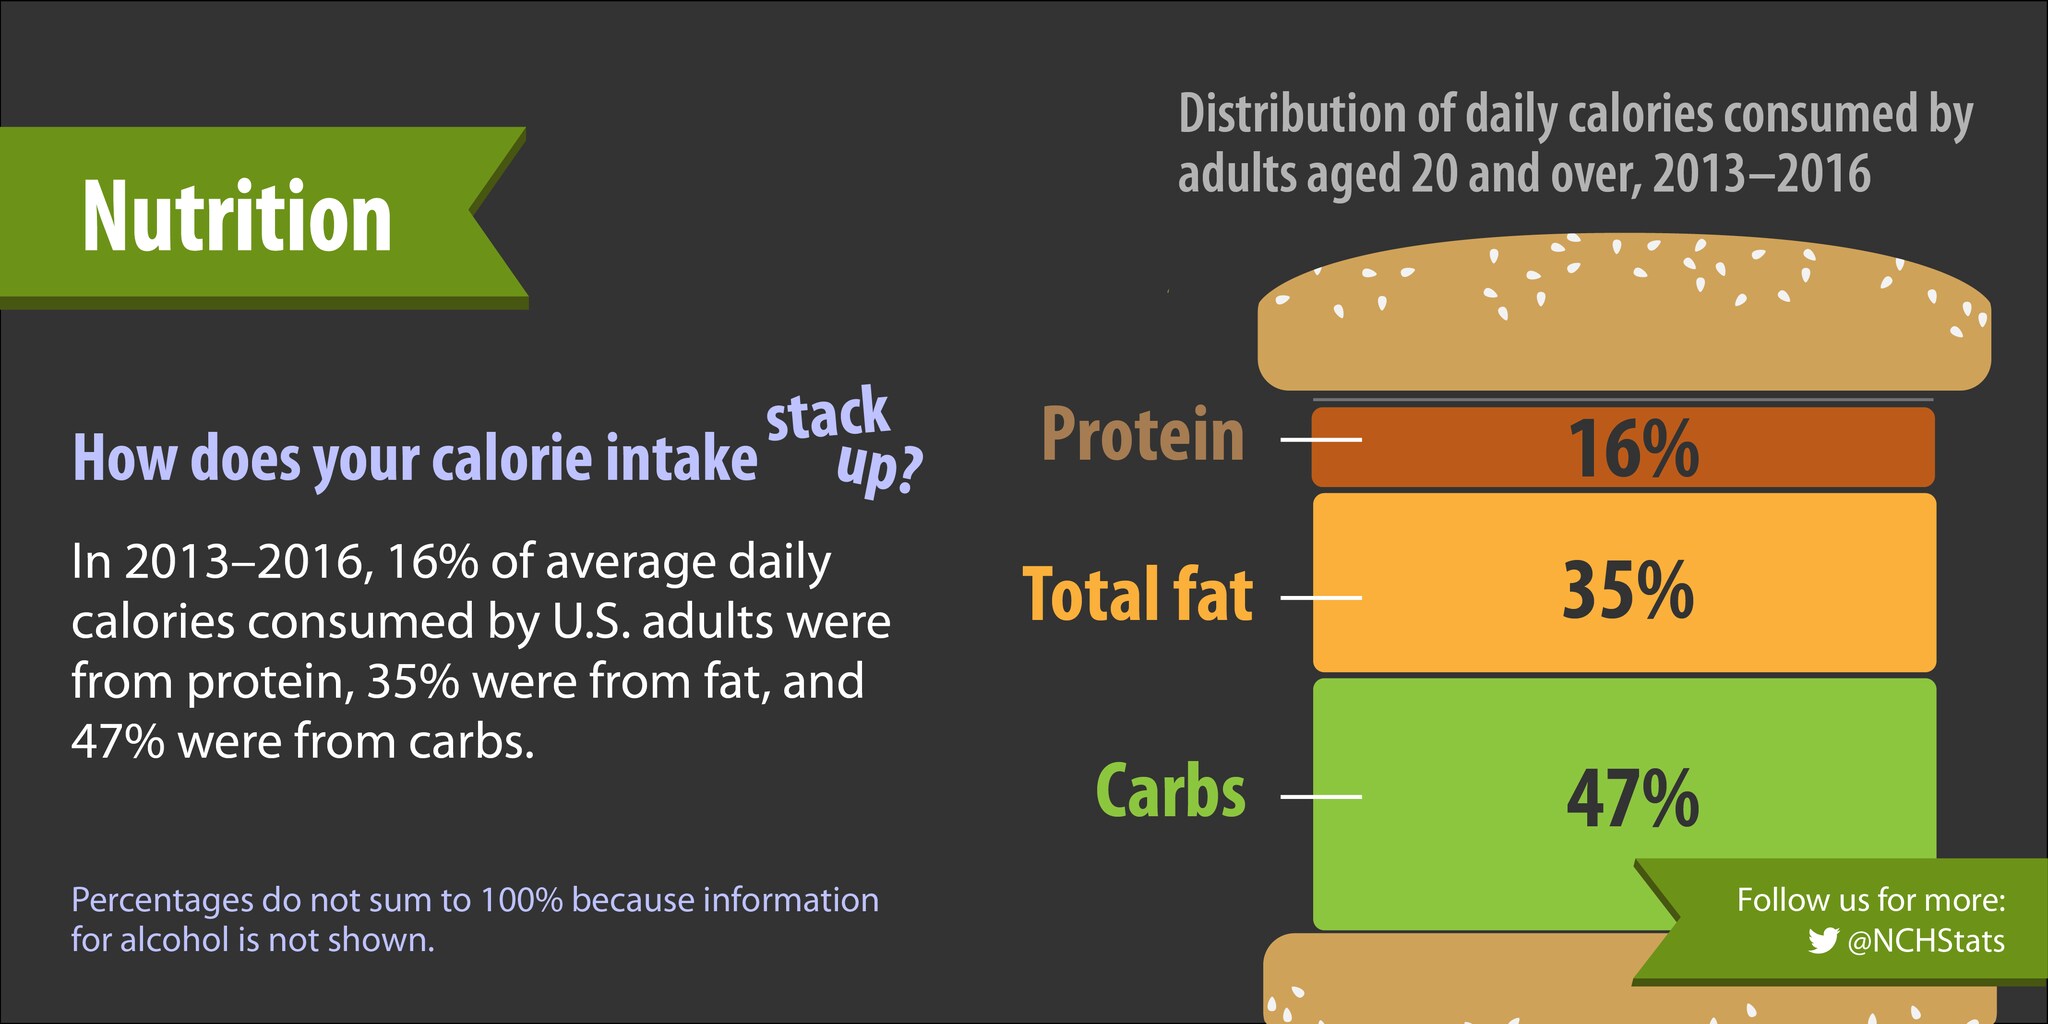 In 2013-2016, 16% of average daily calories consumed by U.S. adults were from protein, 35% were from fat, and 47% were from carbs.